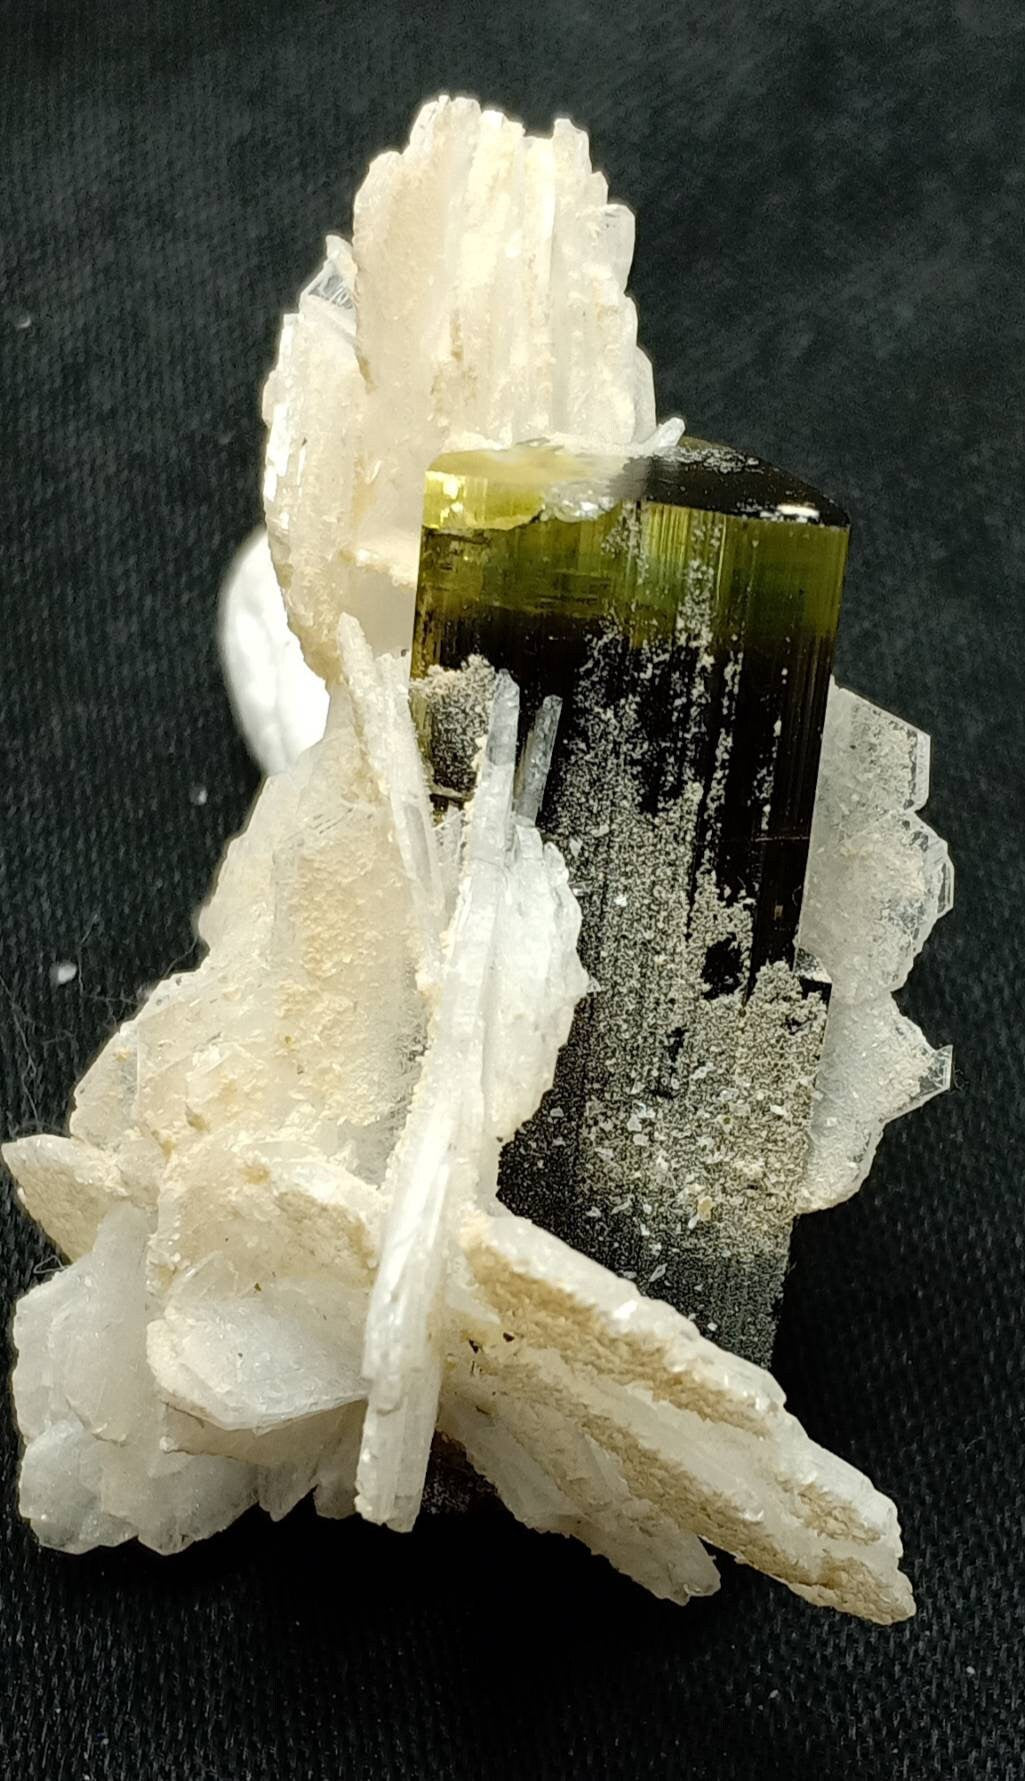 An amazing specimen of multicolor Tourmaline with associated flower like albite formations 18 grams